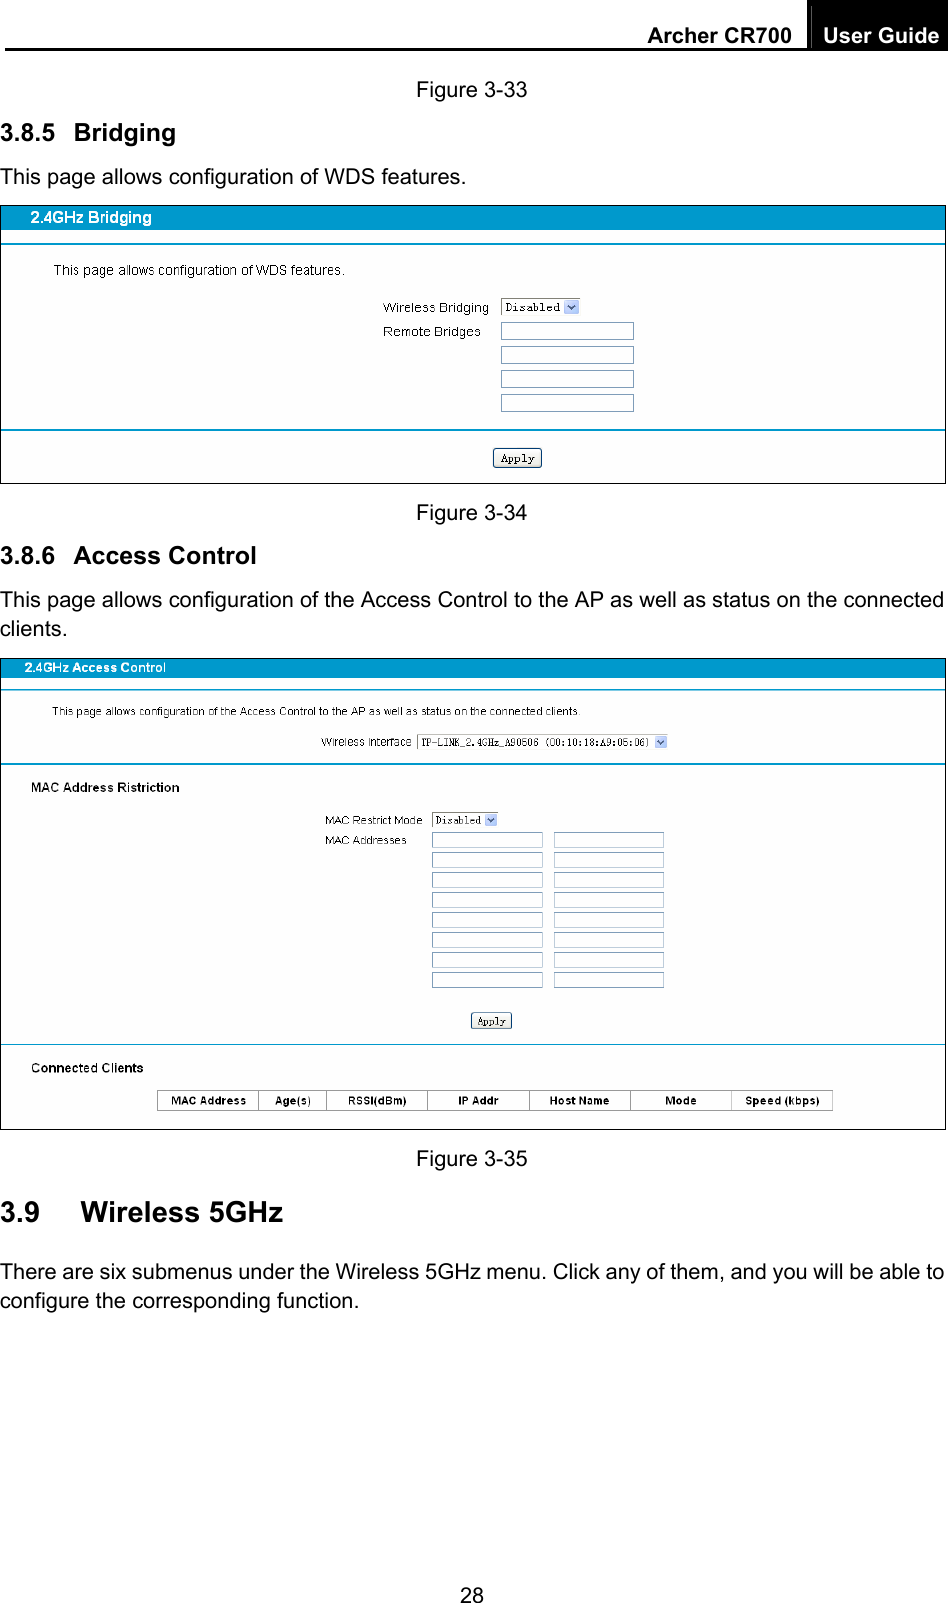 Archer CR700  User Guide 28 Figure 3-33 3.8.5  Bridging This page allows configuration of WDS features.  Figure 3-34 3.8.6  Access Control This page allows configuration of the Access Control to the AP as well as status on the connected clients.  Figure 3-35 3.9  Wireless 5GHz There are six submenus under the Wireless 5GHz menu. Click any of them, and you will be able to configure the corresponding function.   